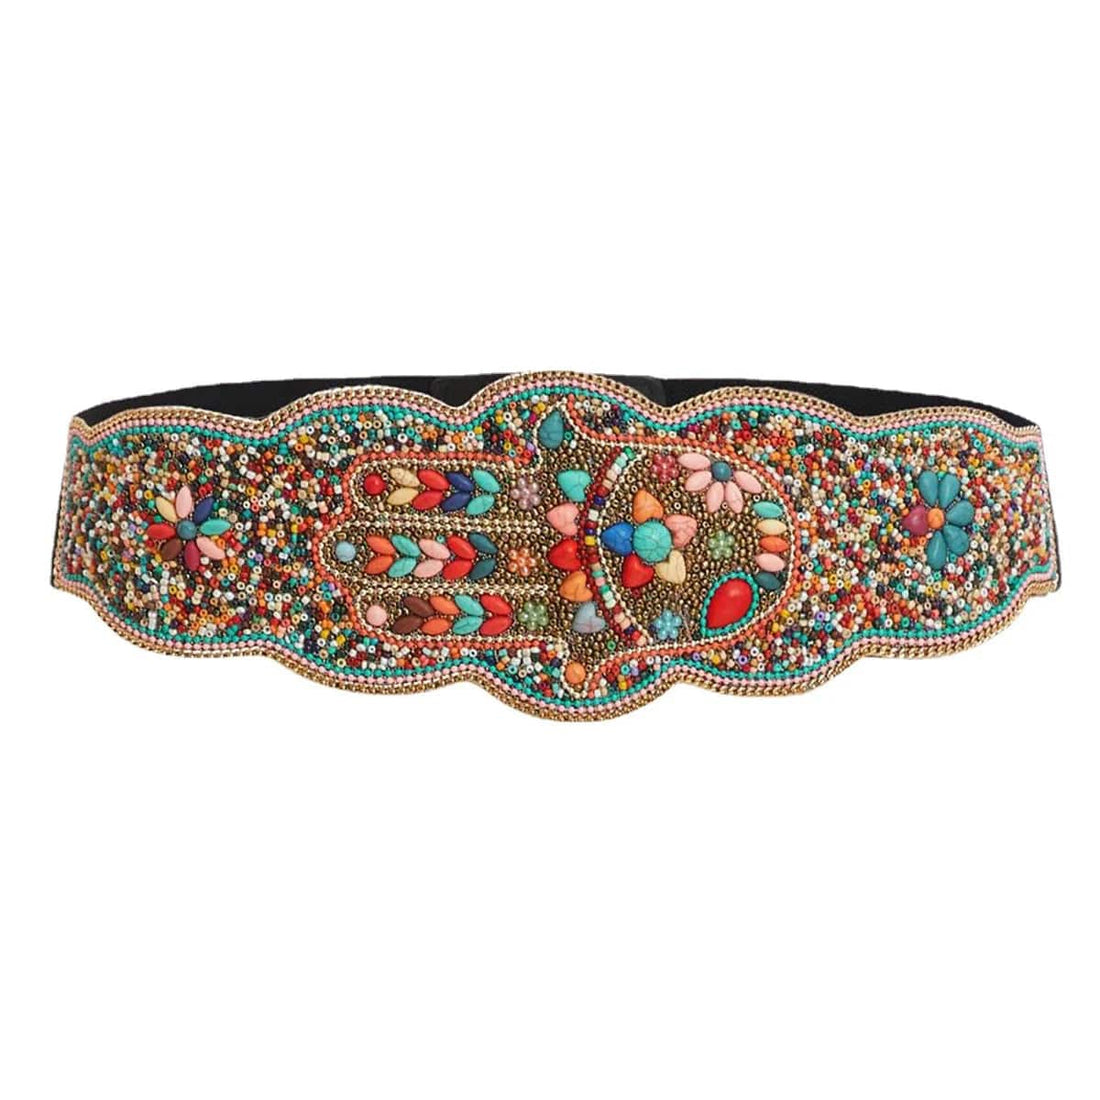 Mexican embroidered belt sash